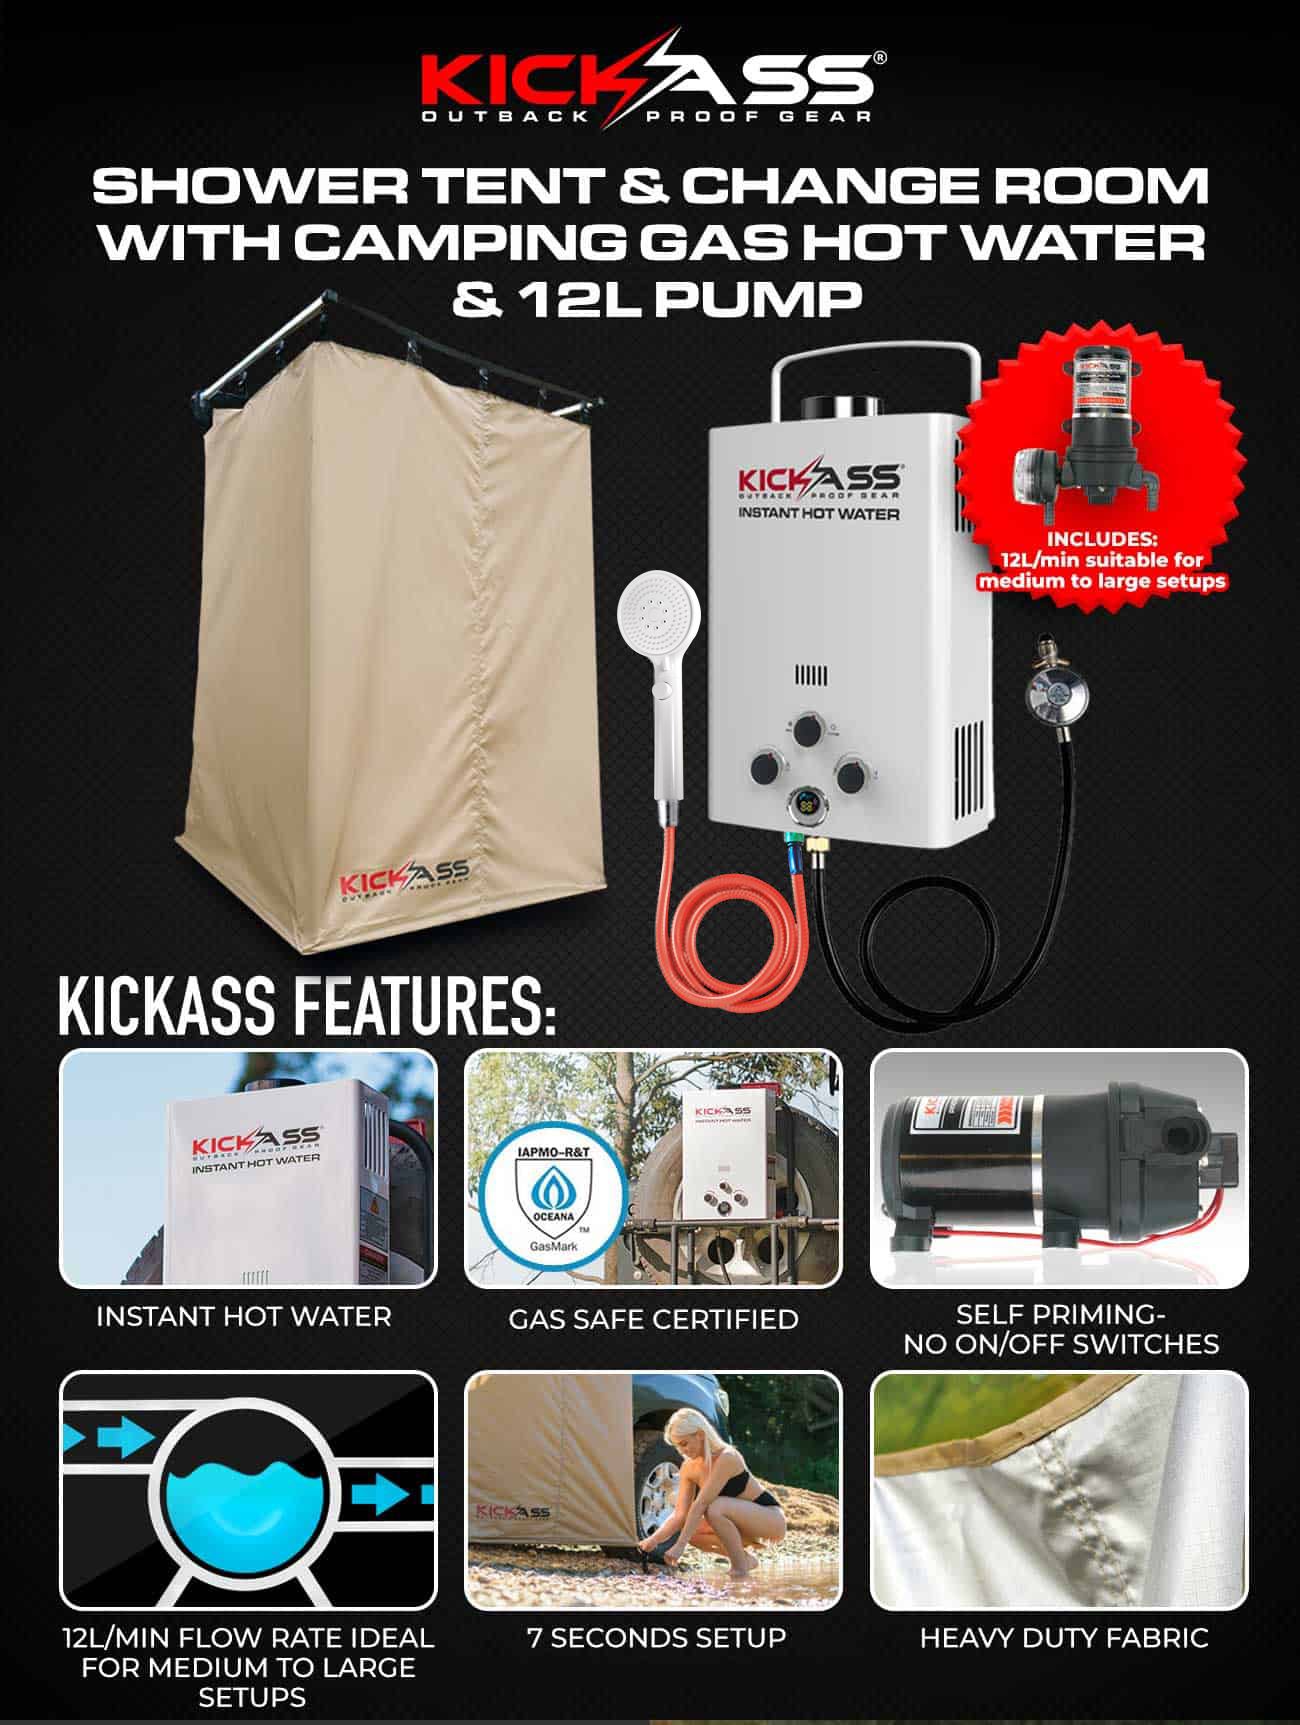 KASTENT-AWNGHW12L KICKASS Shower Tent & Change Room with Camping Gas Hot Water & 12L Pump